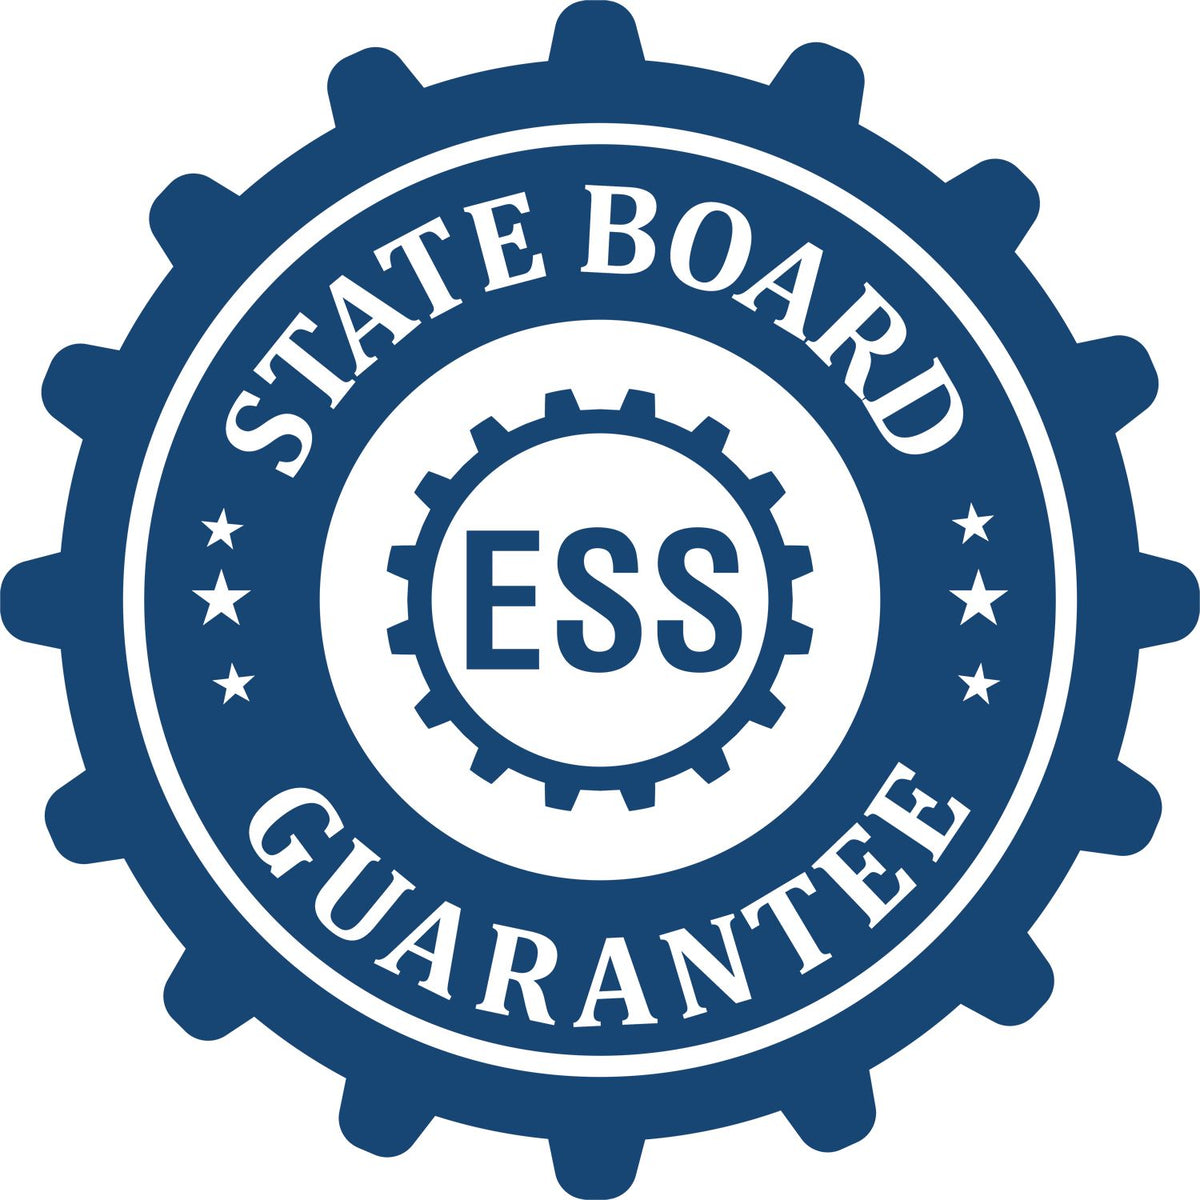 An emblem in a gear shape illustrating a state board guarantee for the Heavy-Duty Arkansas Rectangular Notary Stamp product.